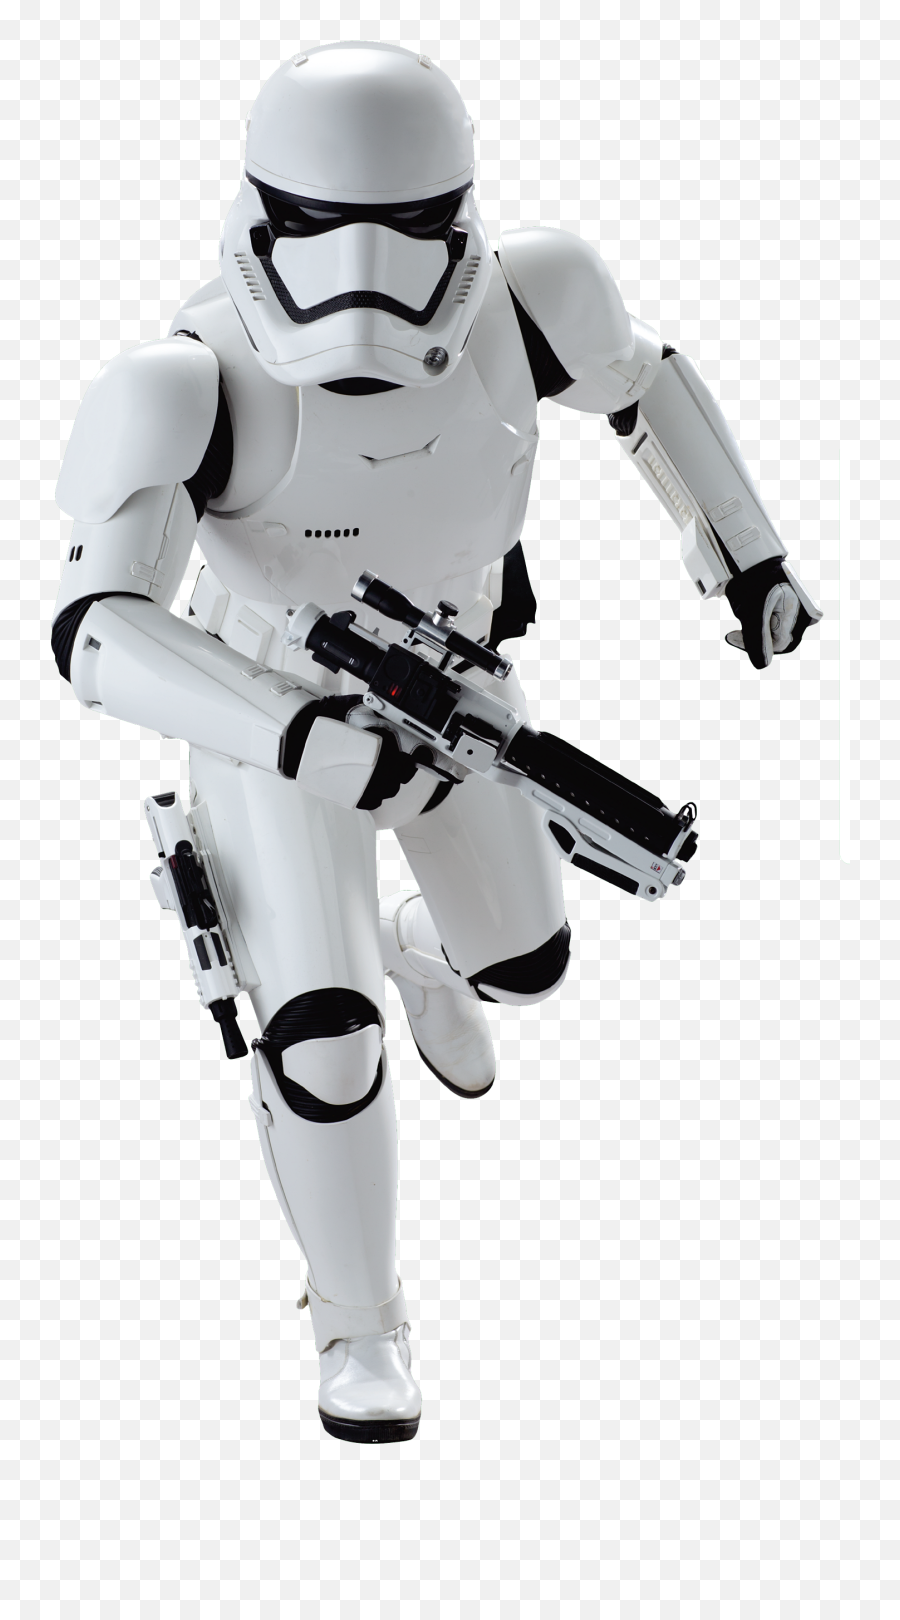 Stormtrooper Star Wars Png Picture - Stormtrooper Star Wars Png Emoji,Star Wars Png